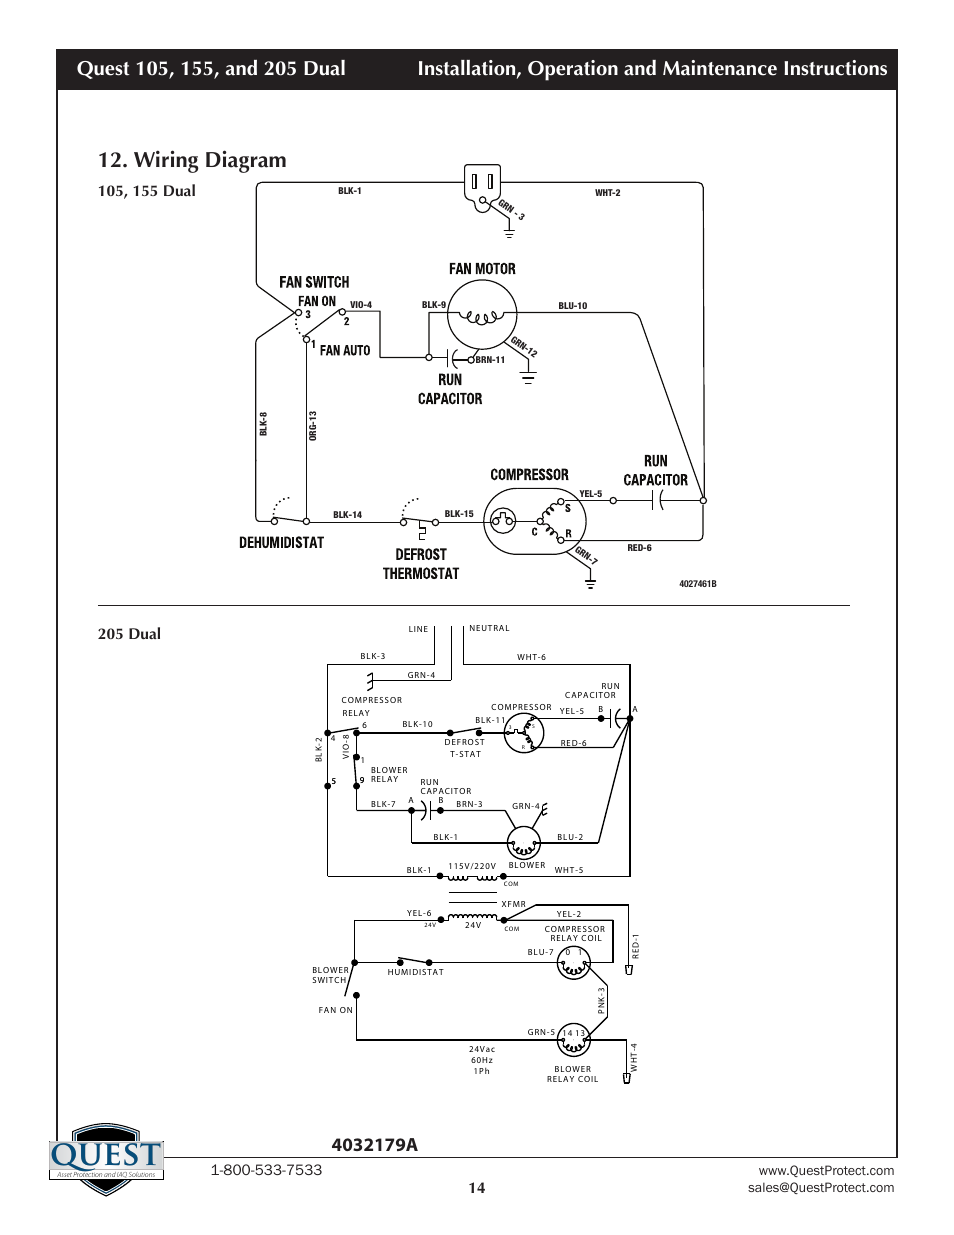 Quest, Wiring diagram | Sunlight Supply Quest Dual 155 Overhead Dehumidifier User Manual | Page 14 / 15